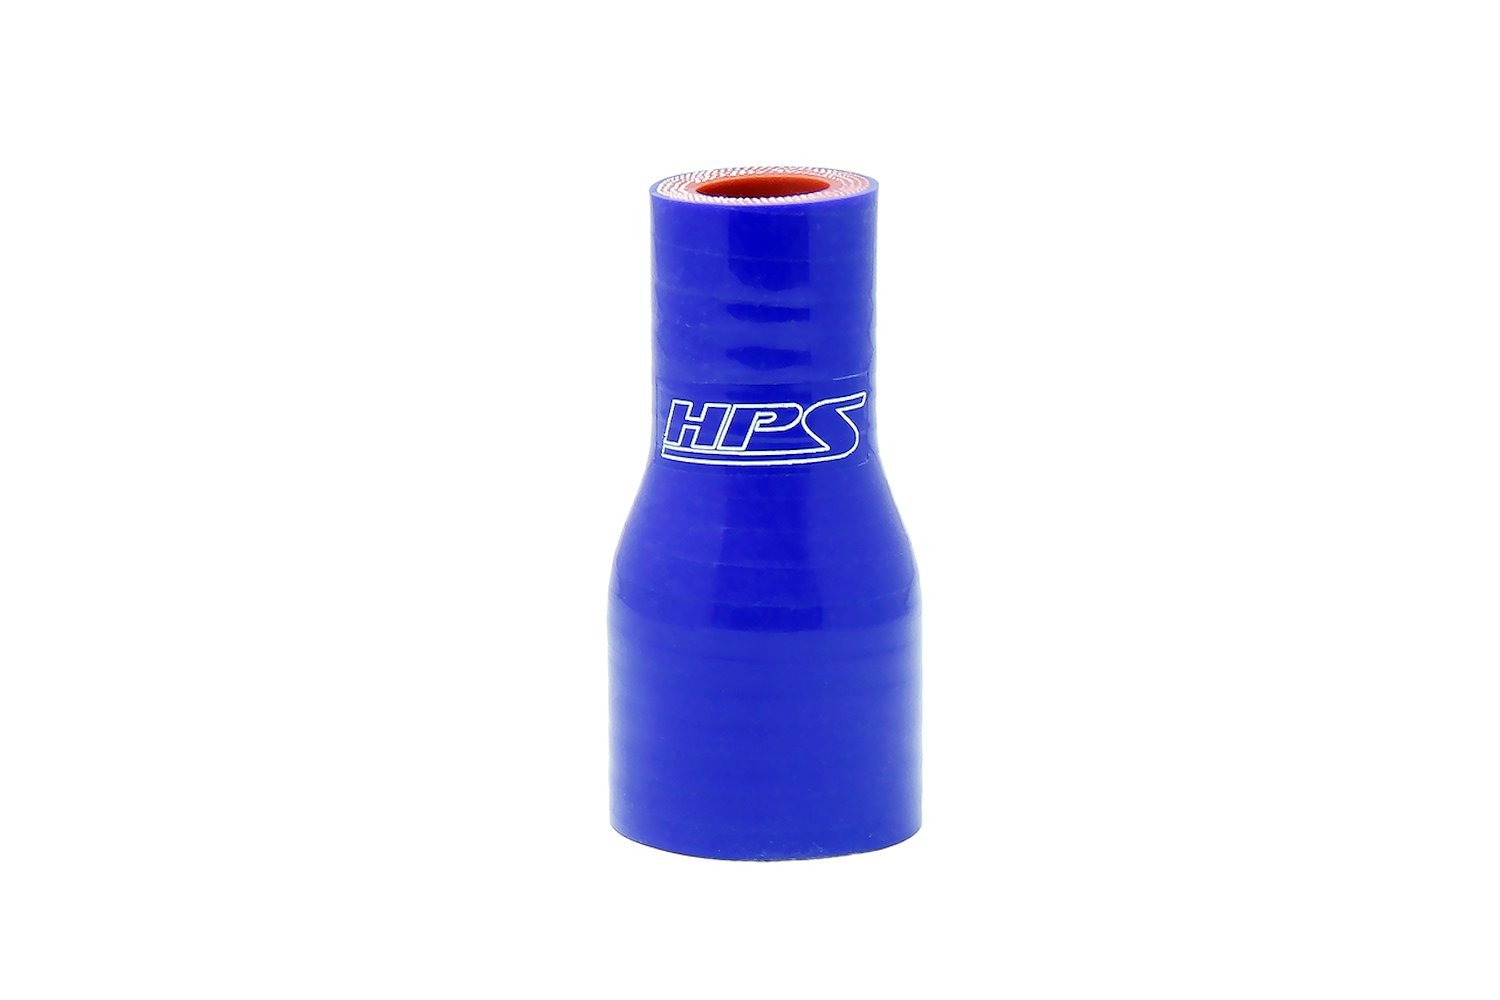 HTSR-138-175-L4-BLUE Silicone Reducer Hose, High-Temp 4-Ply Reinforced, 1-3/8 in. - 1-3/4 in. ID, 4 in. Long, Blue